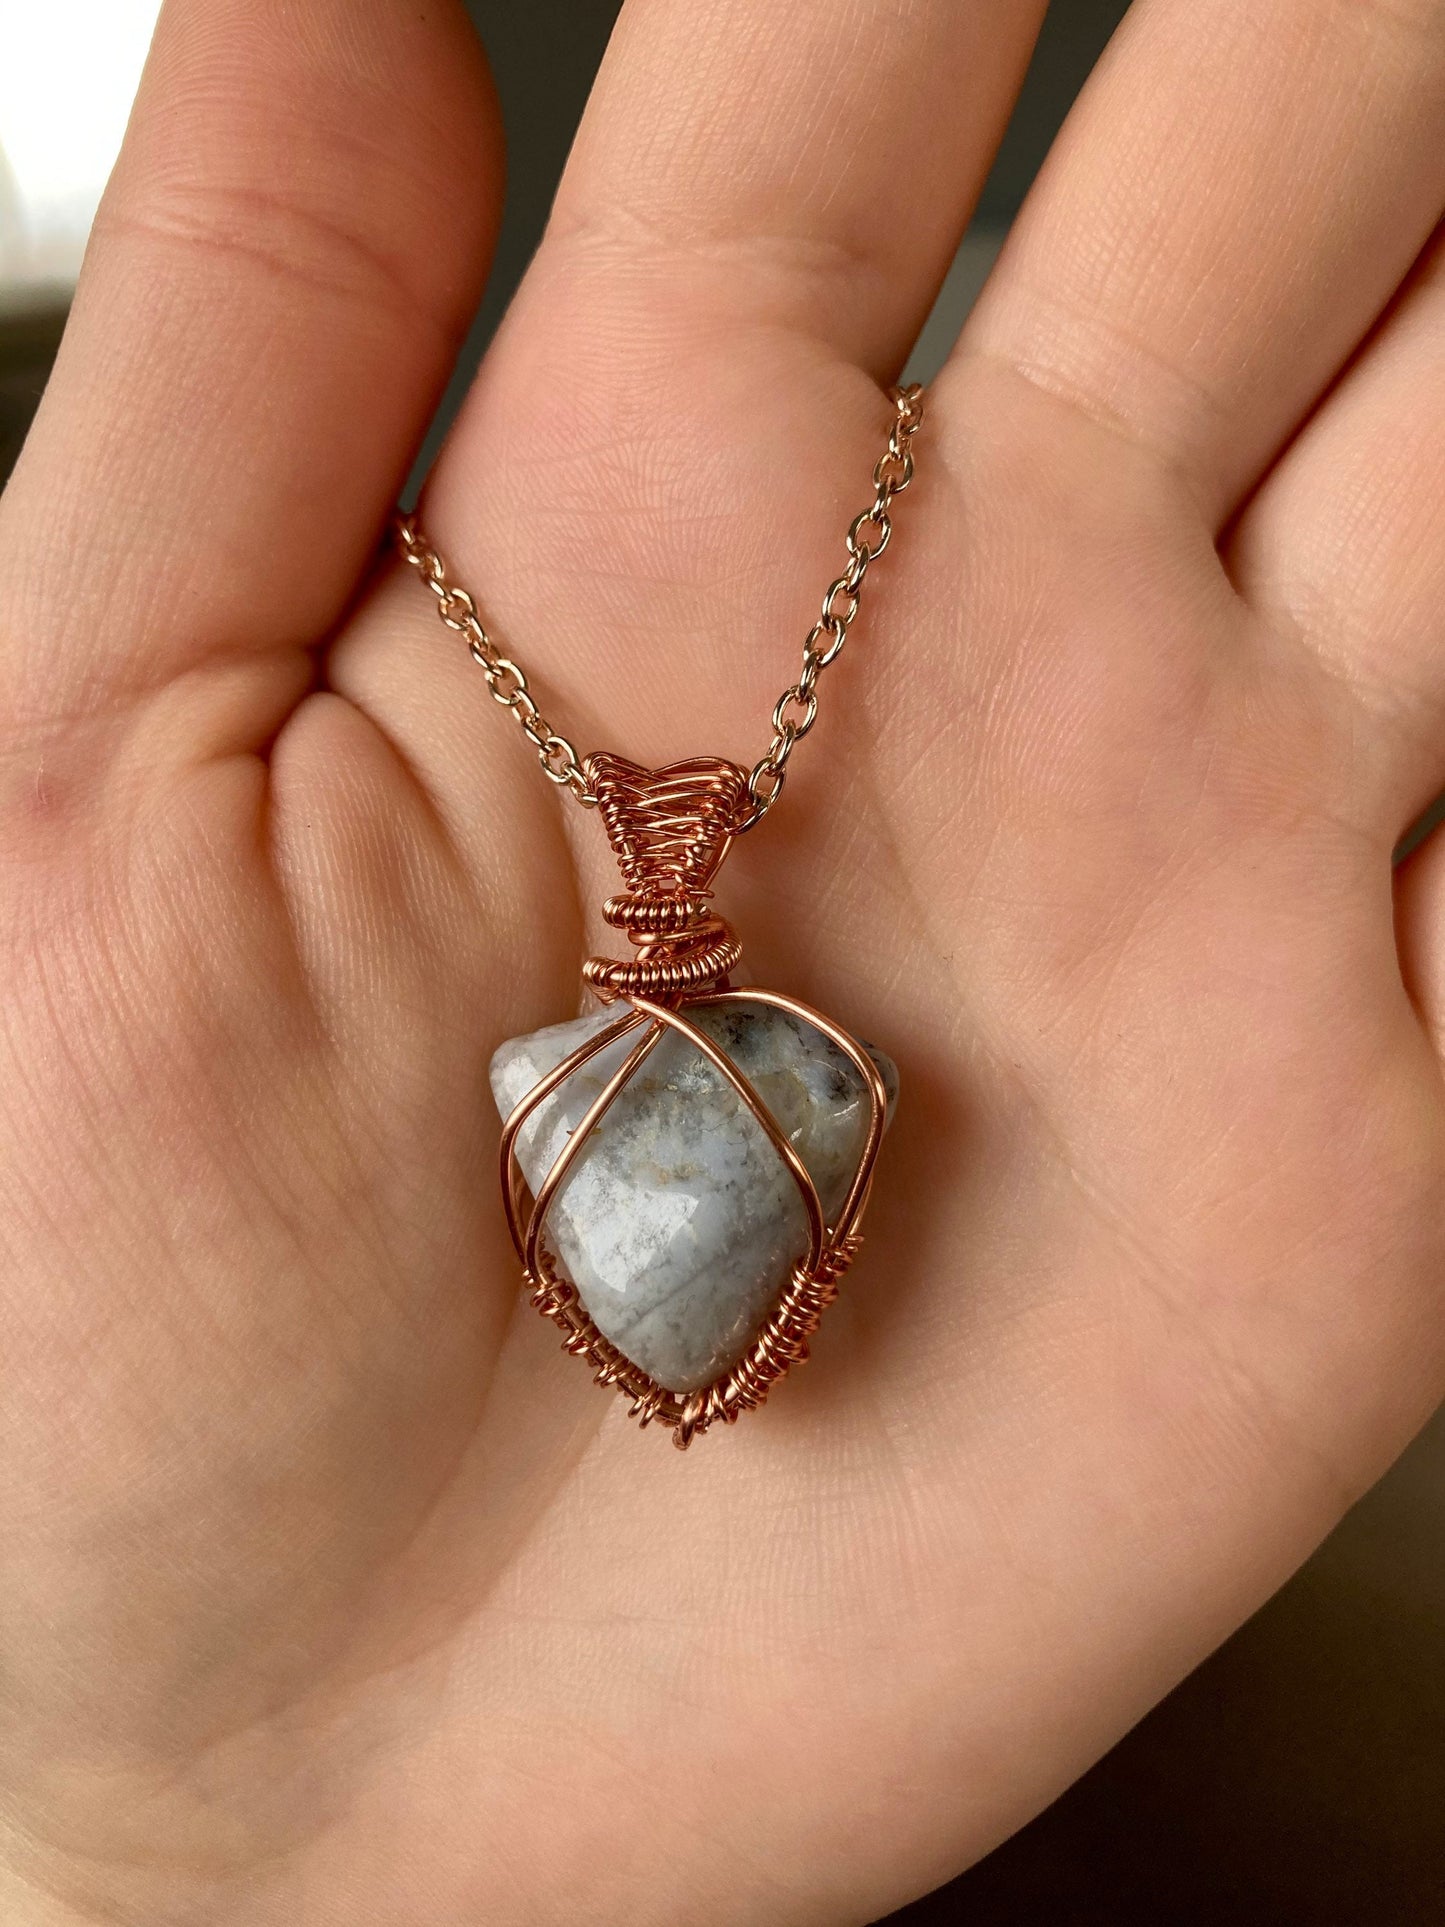 Agate pendant handmade necklace wire wrapped natural stone with 18 inch length chain